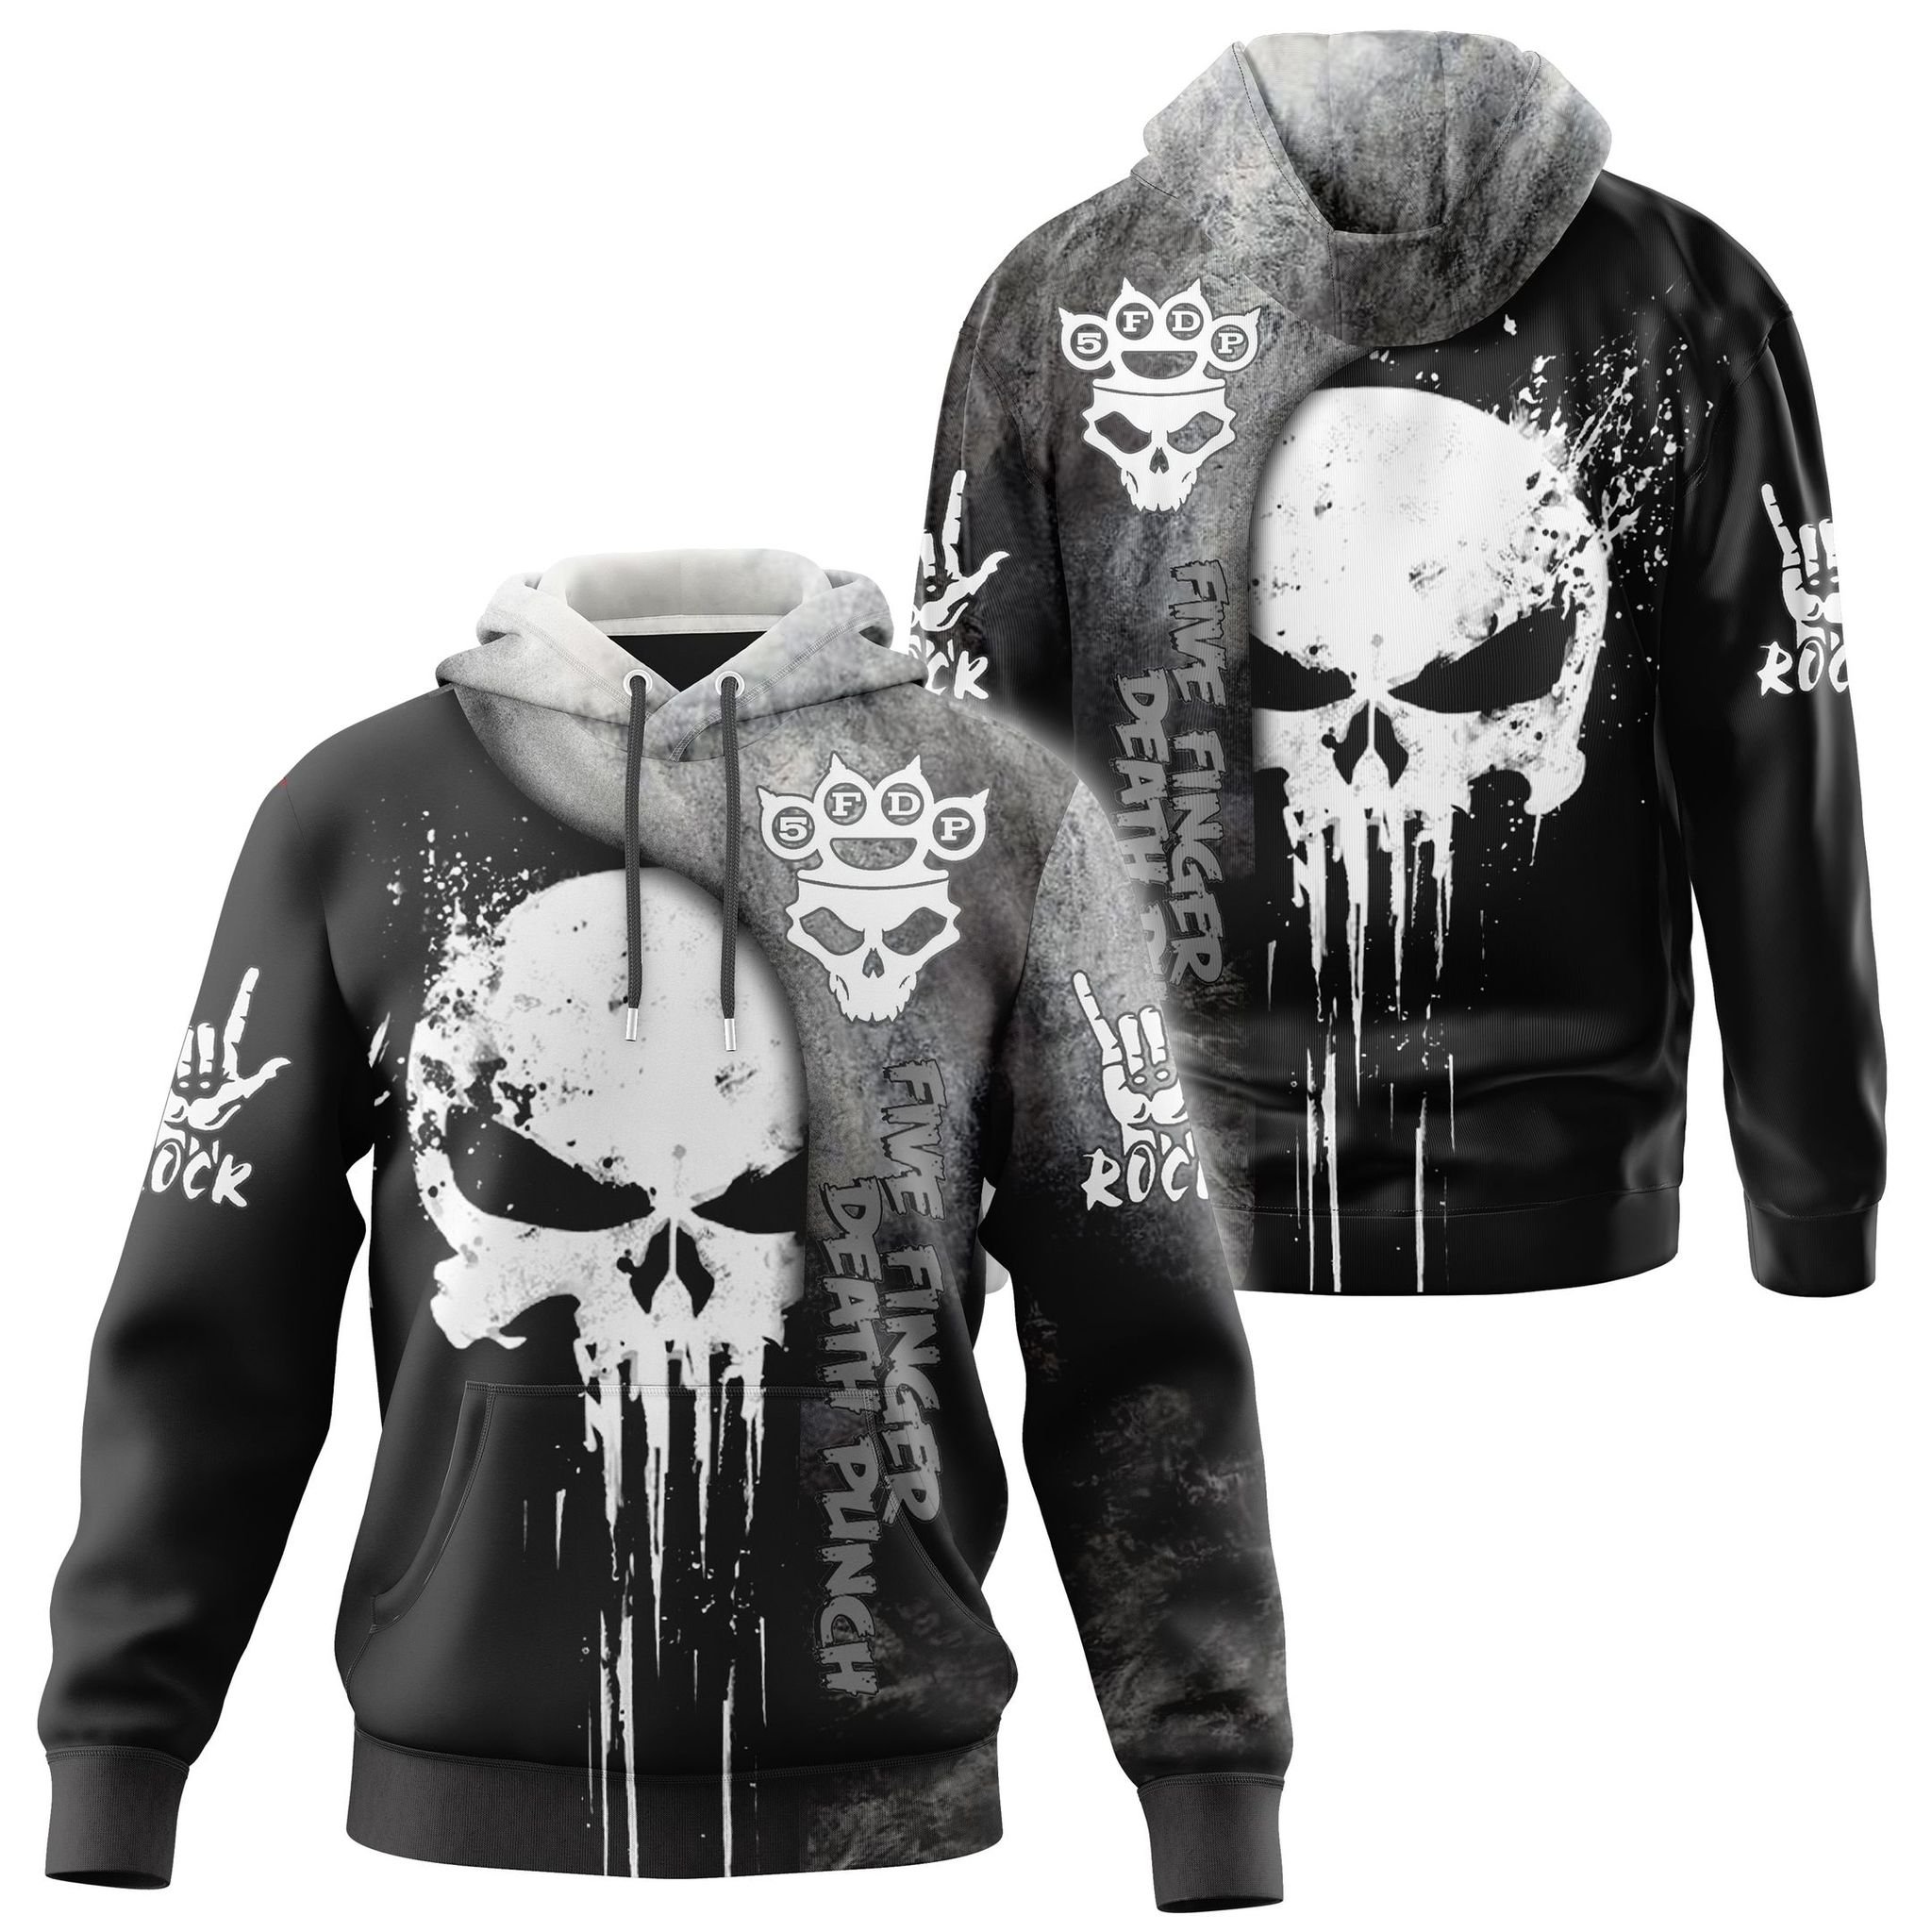 Skull five finger death punch 3d hoodie and shirt – LIMITED EDITION